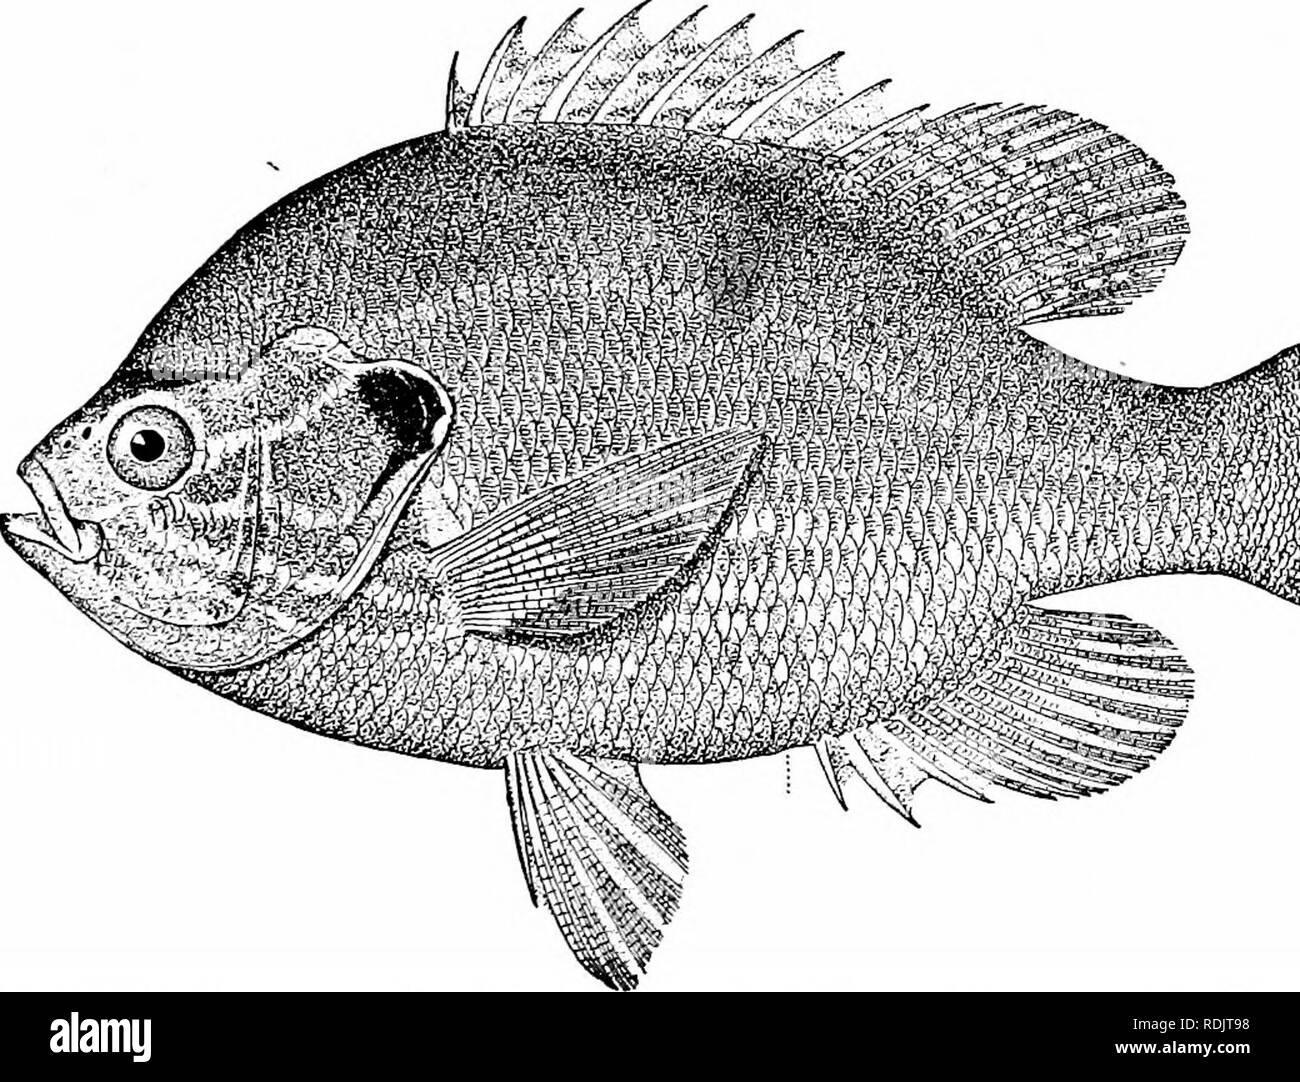 . A guide to the study of fishes. Fishes; Zoology; Fishes. Percoidea^ or Perch-like Fishes 301 aquarium fish is the black-banded sunfish, Mesogonistius chcsto- don, of the Delaware, as also the nine-spined sunfish, Enneacan- thus gloriosus, of the coast streams southward. Apomotis cyanel- lus, the blue-green sunfish or little redeye, is very widely dis- tributed from Ohio westward, living in every brook. The dis- section of this species is given on page 26, Vol. I. To Lepomis belong numerous species having the opercle prolonged in a long flap which is always black in color, often with a border Stock Photo